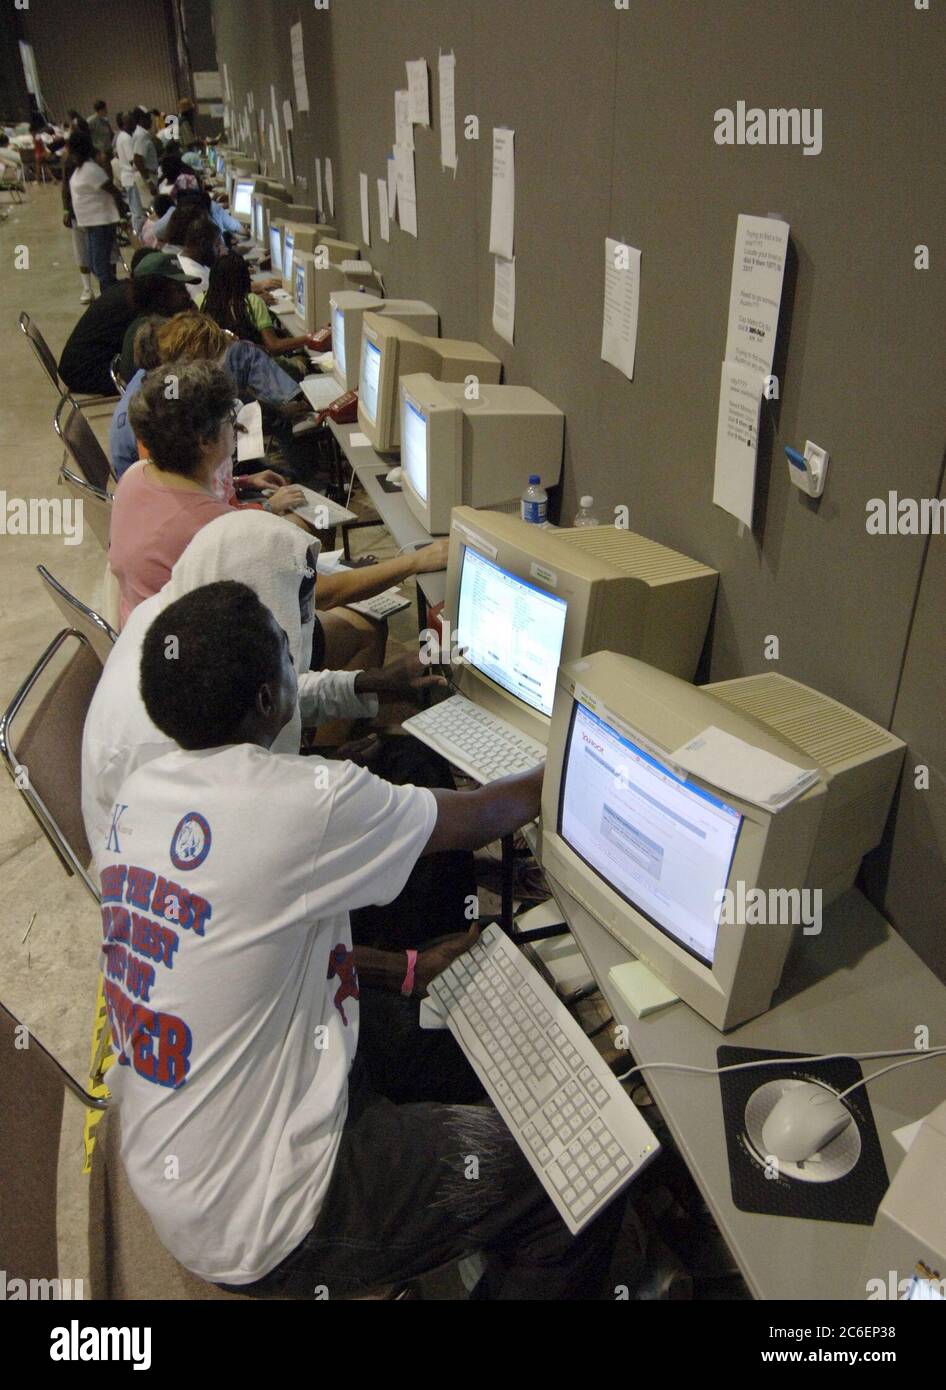 Austin, Texas USA, September 5, 2005: Dozens of internet-connected computers are lined up and being used by Hurricane Katrina refugees at the Austin Convention Center for connections to family and friends due to last week's weather disaster on the Gulf Coast.  ©Bob Daemmrich Stock Photo